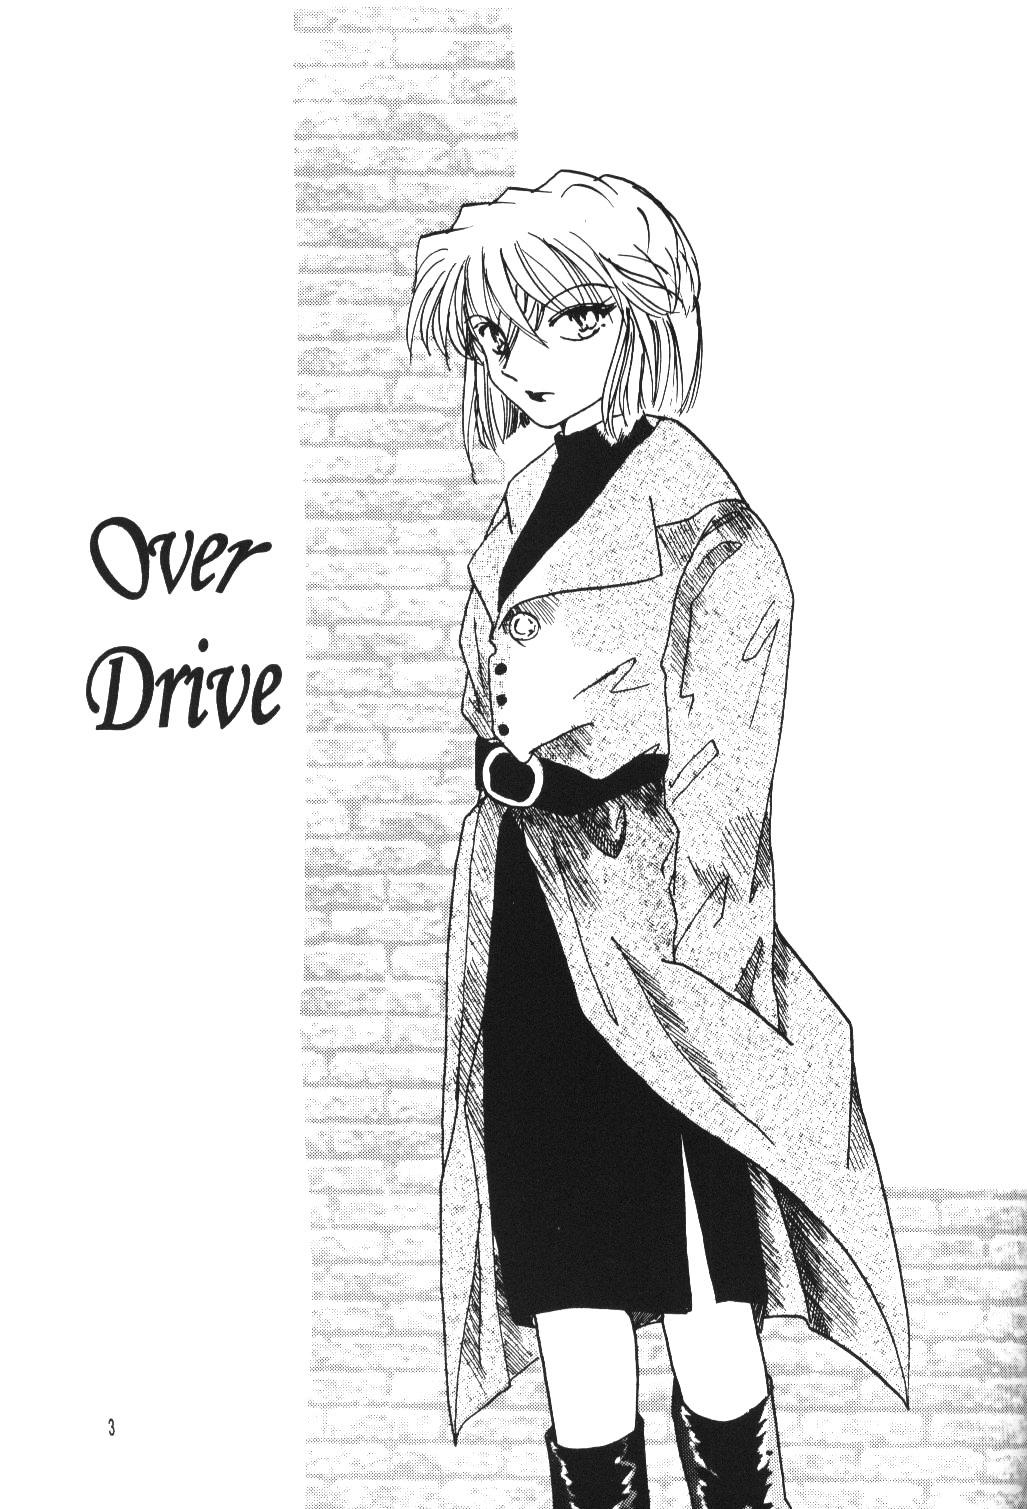 She Over Drive - Detective conan Salope - Page 2